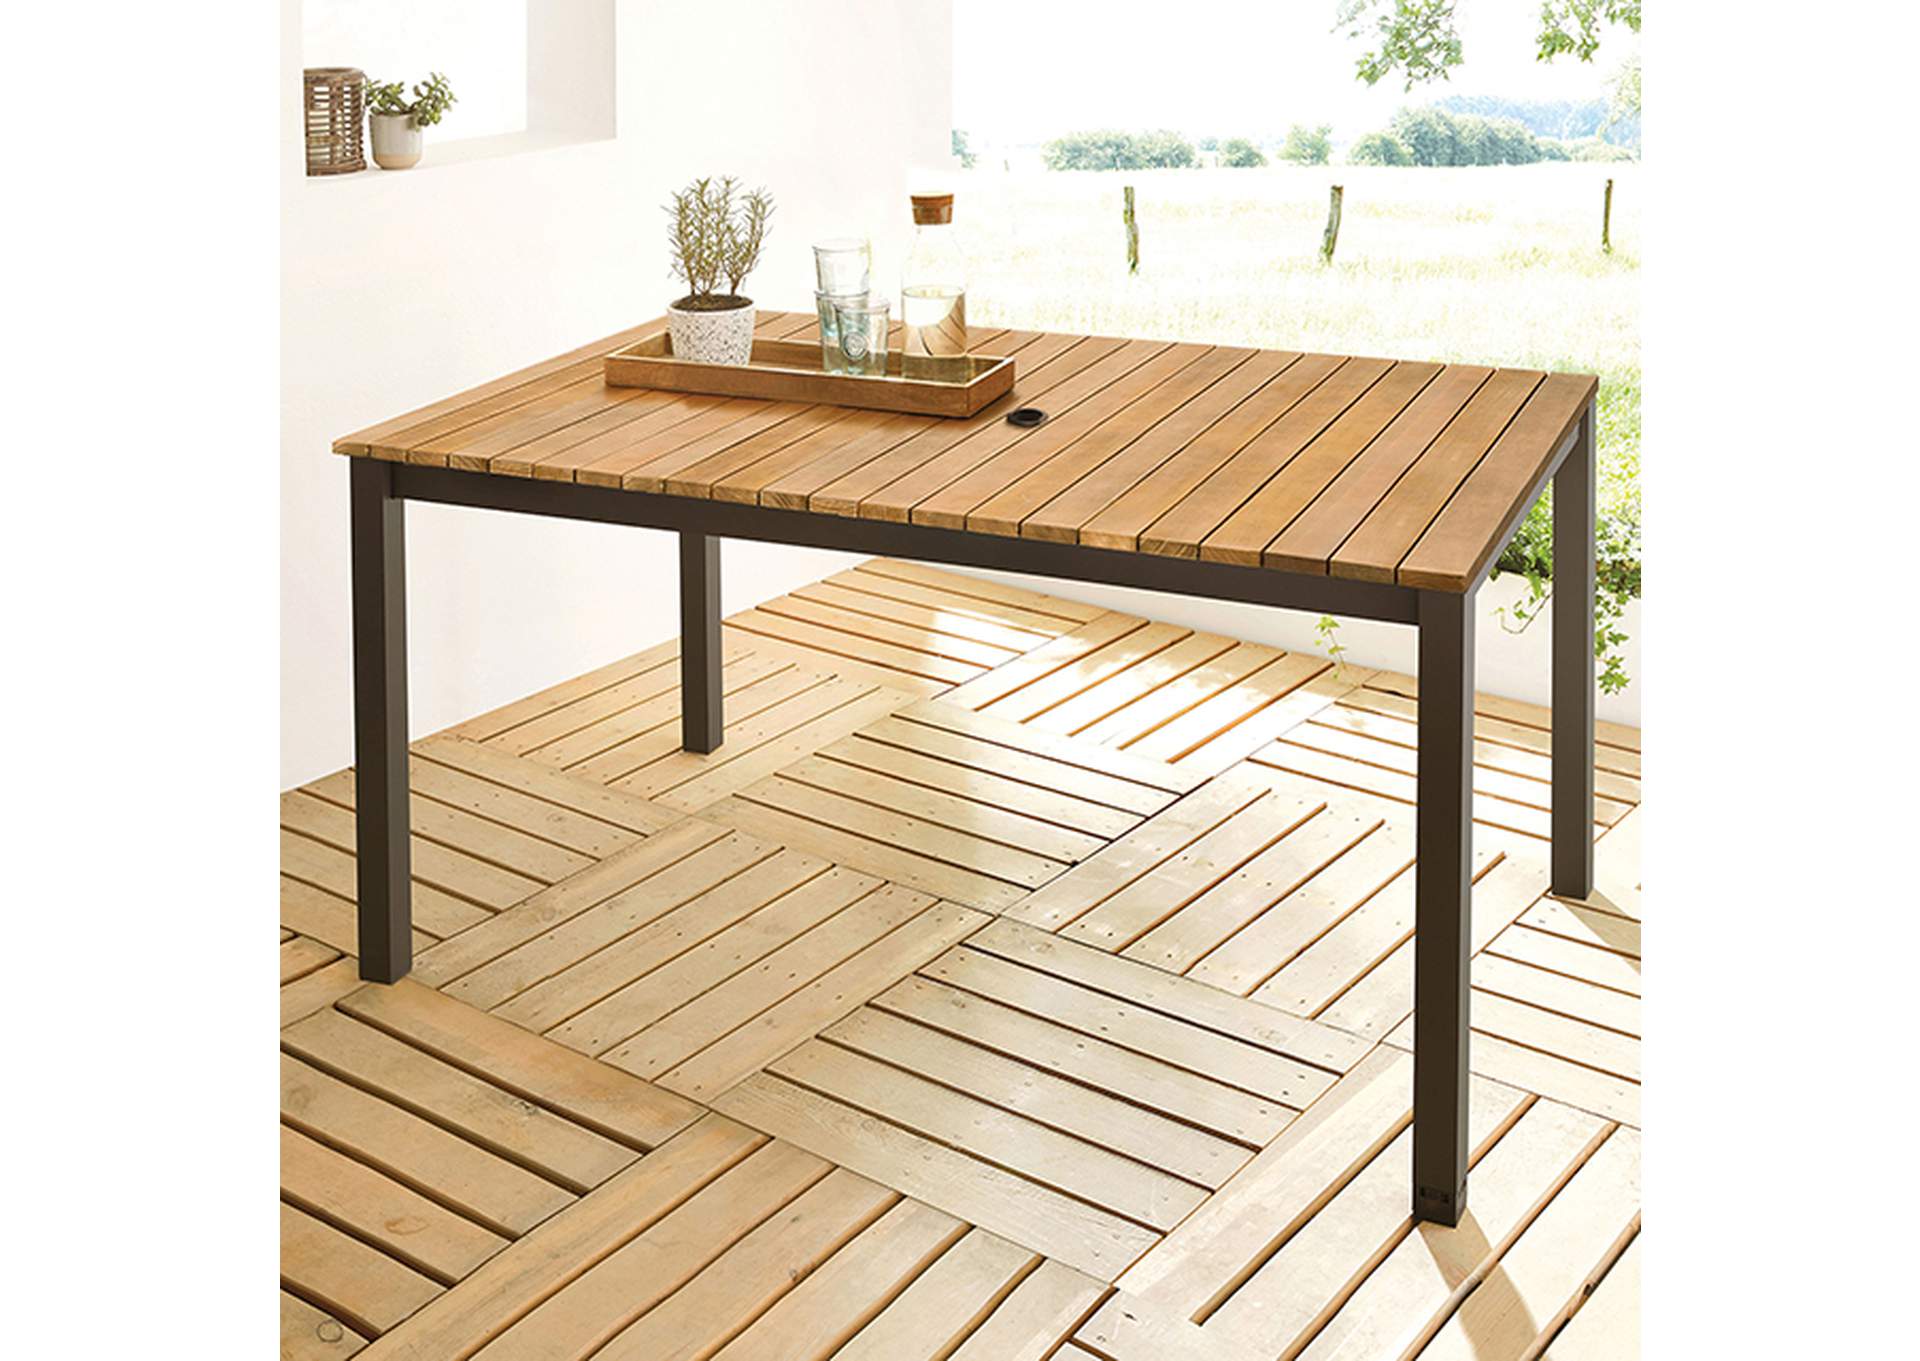 Mackay Patio Dining Table,Furniture of America